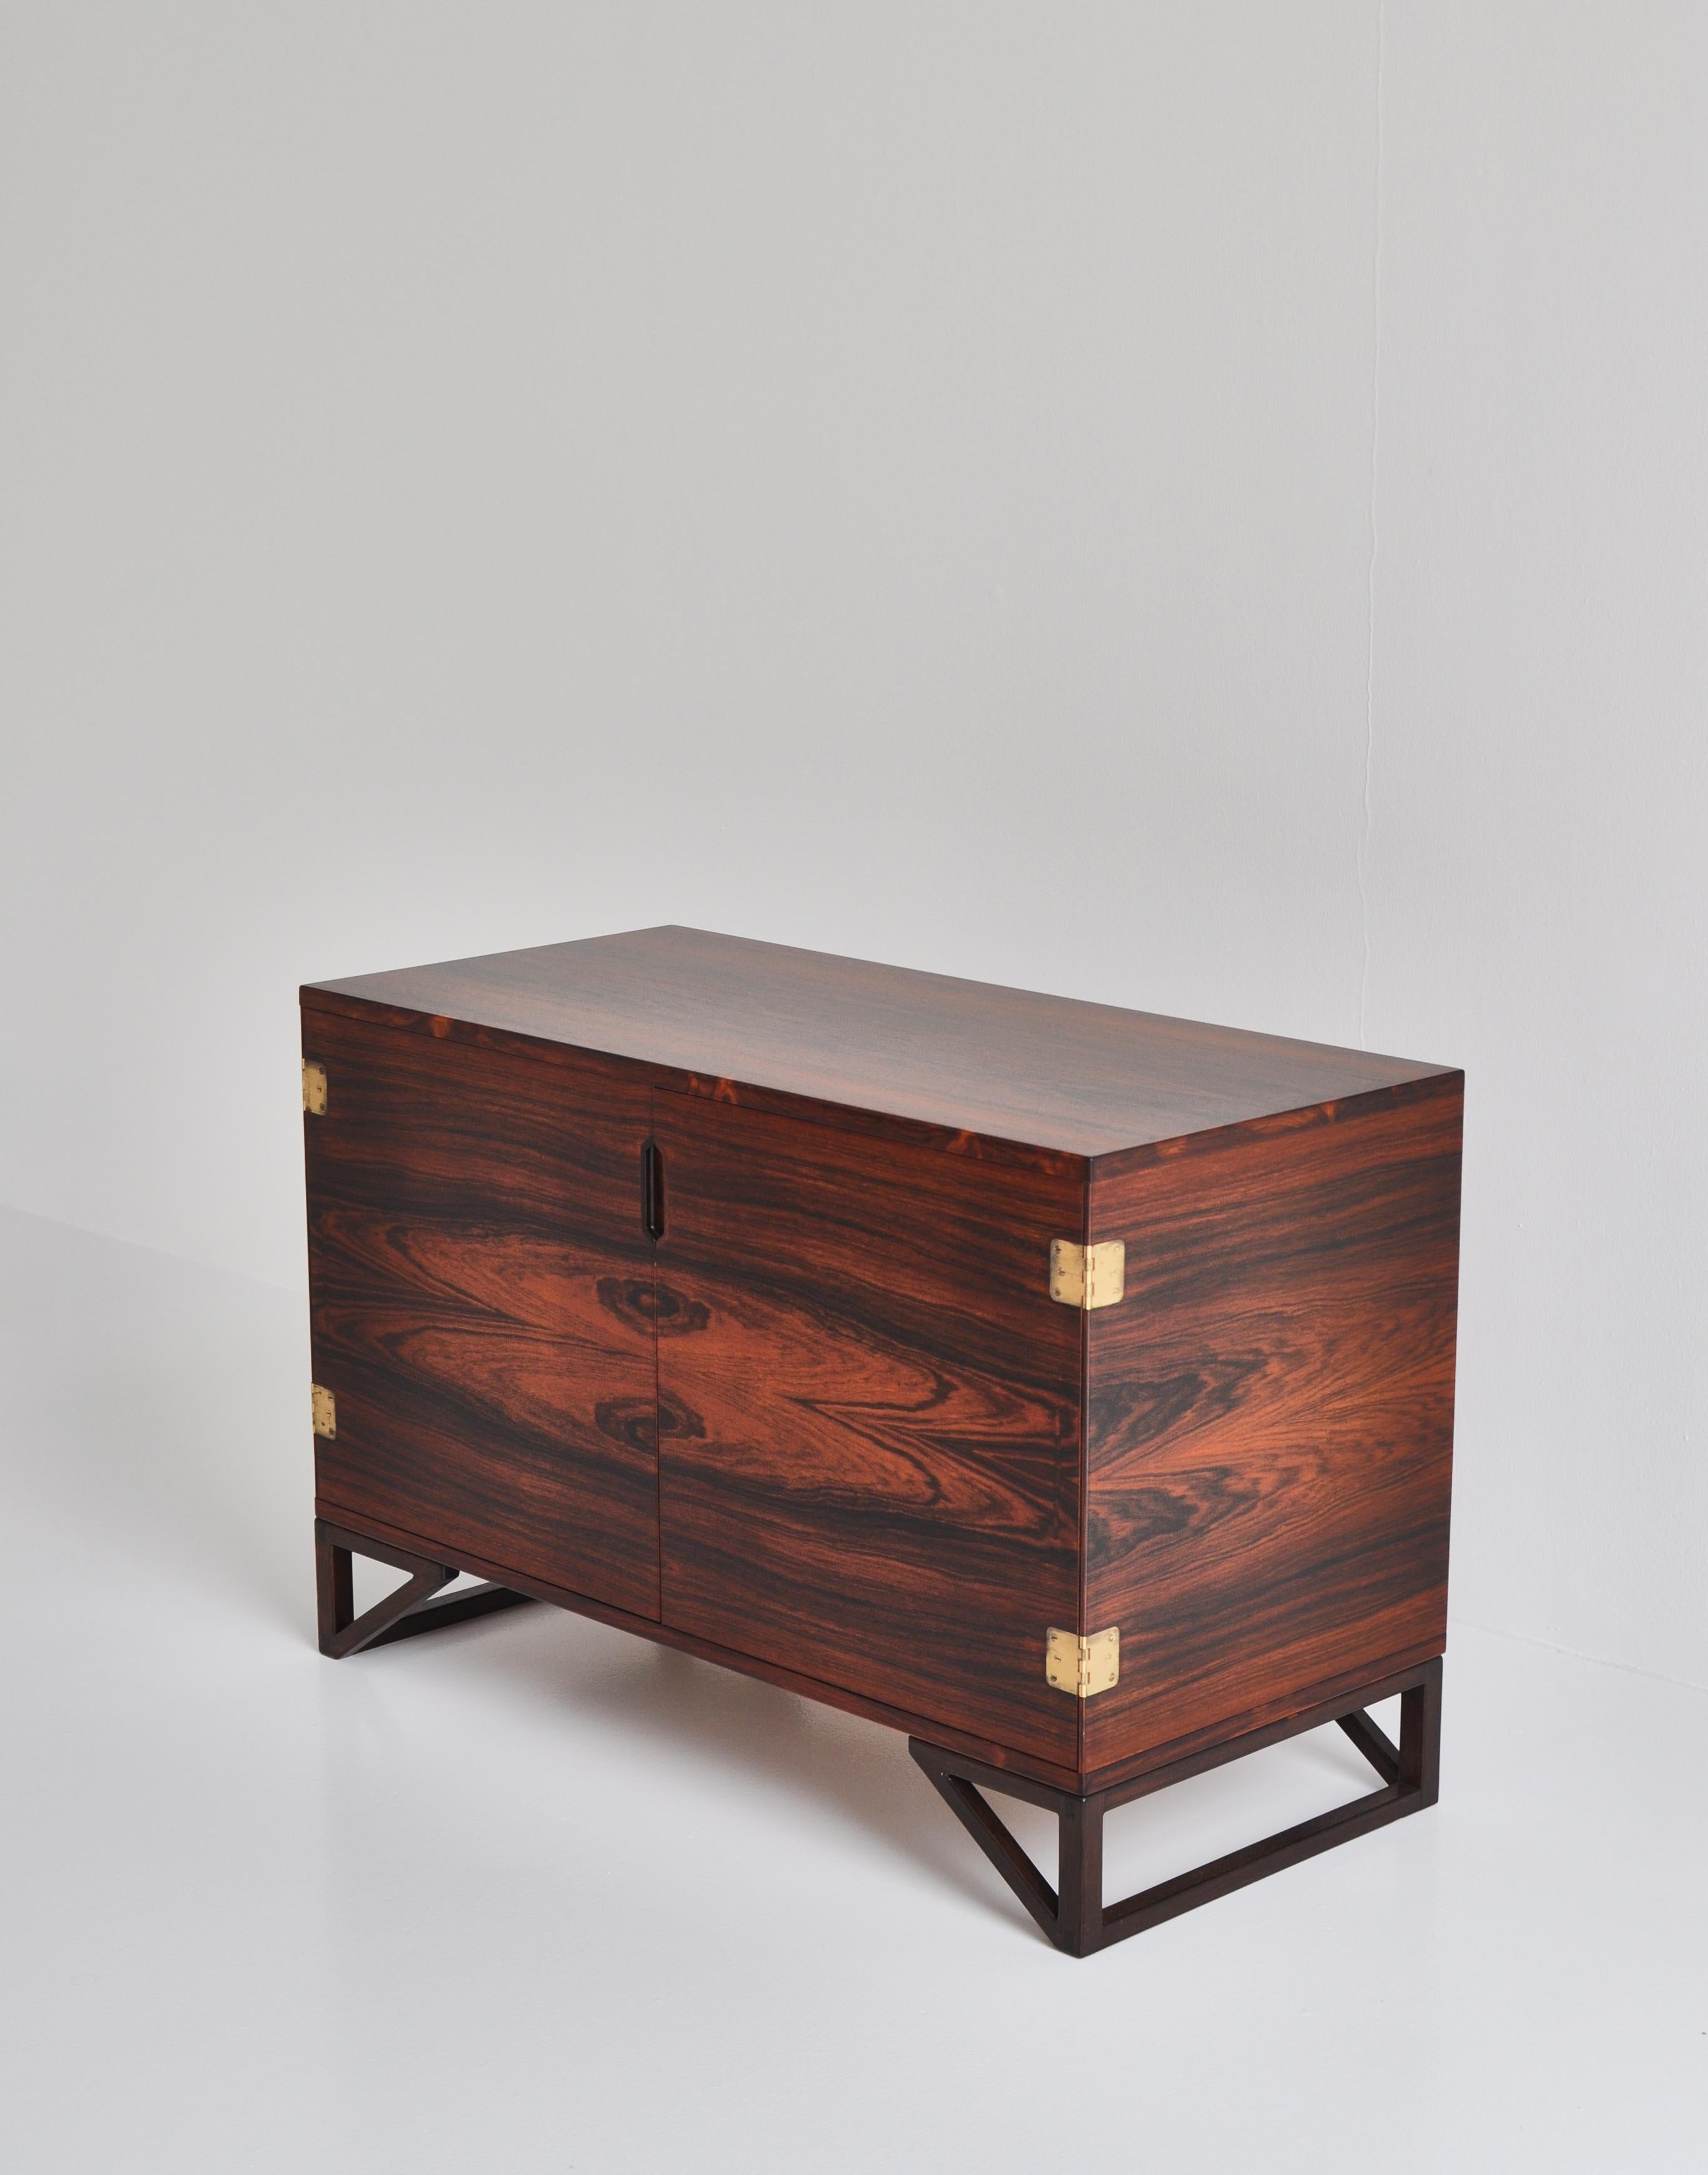 Mid-20th Century Danish Modern Rosewood Cabinet / Sideboard by Svend Langkilde for Illums, 1960s